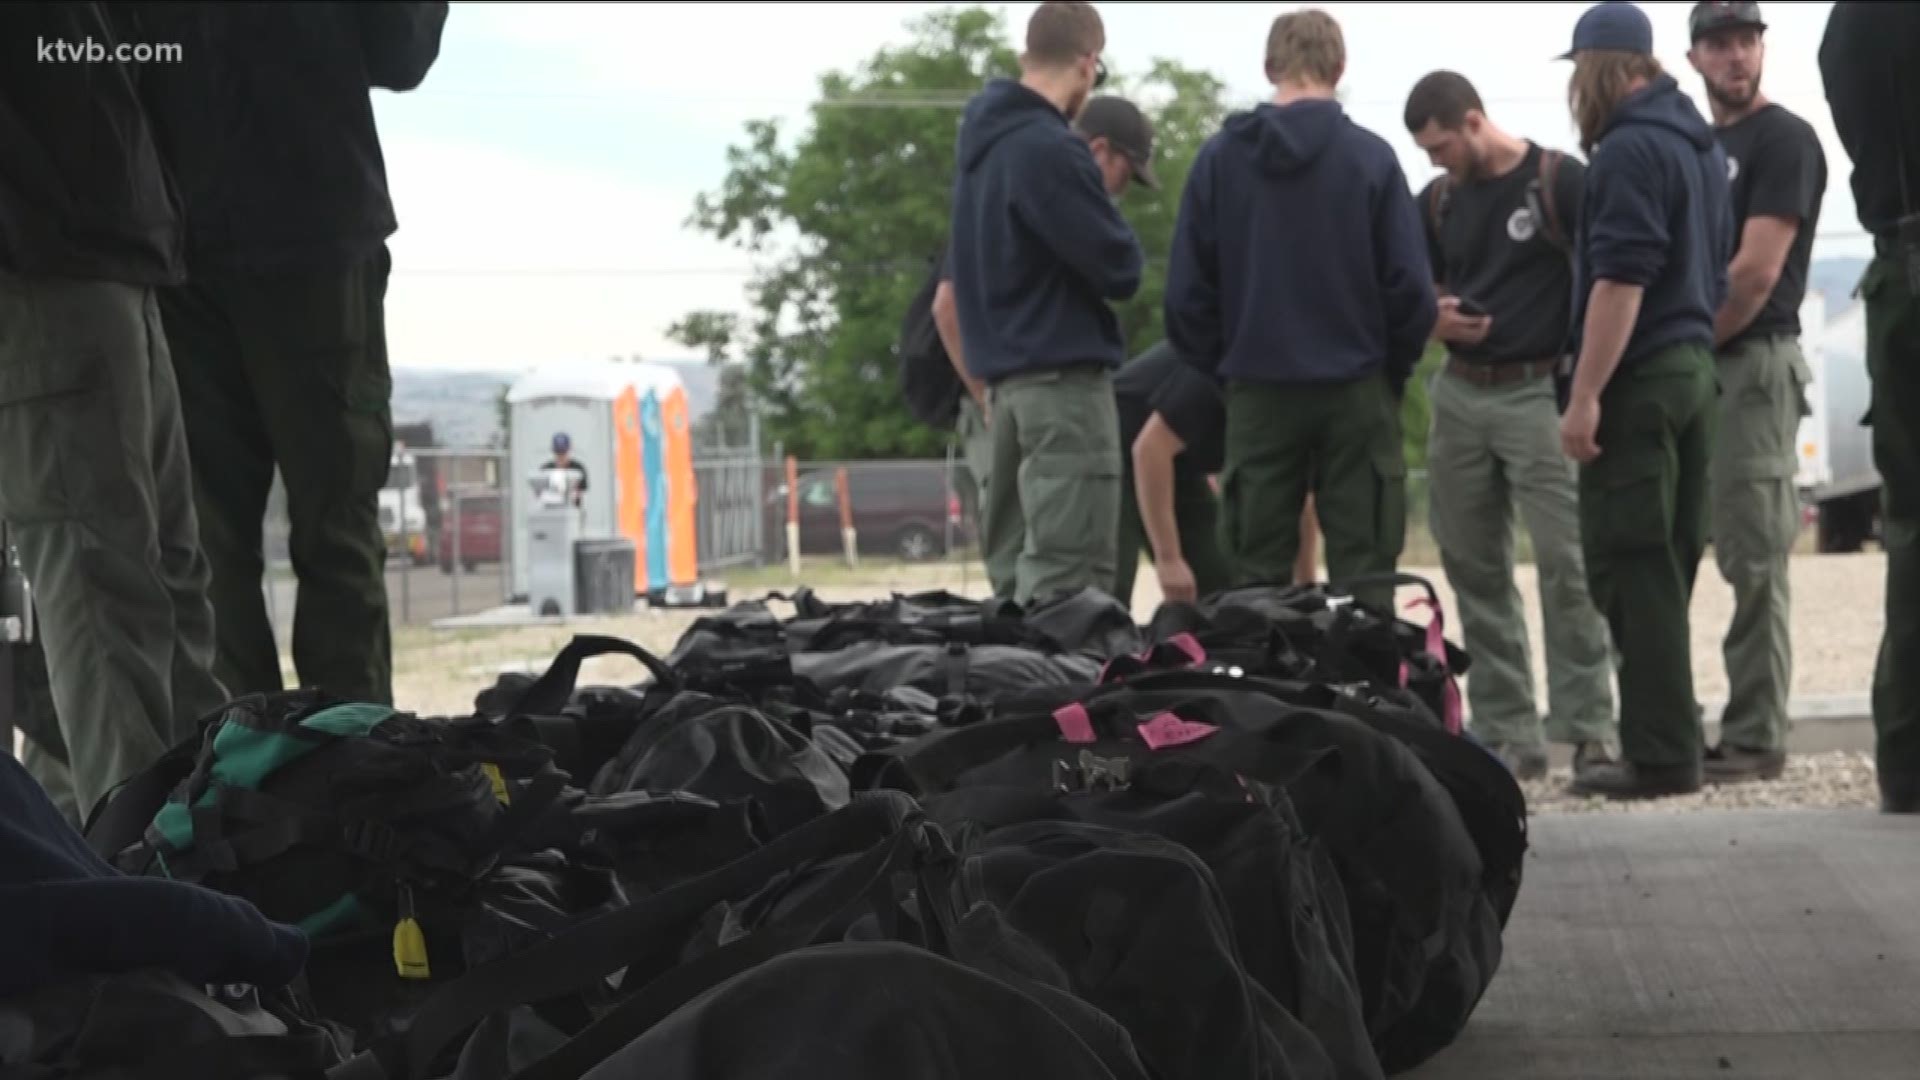 A group of firefighters from Idaho is bound for Alaska.